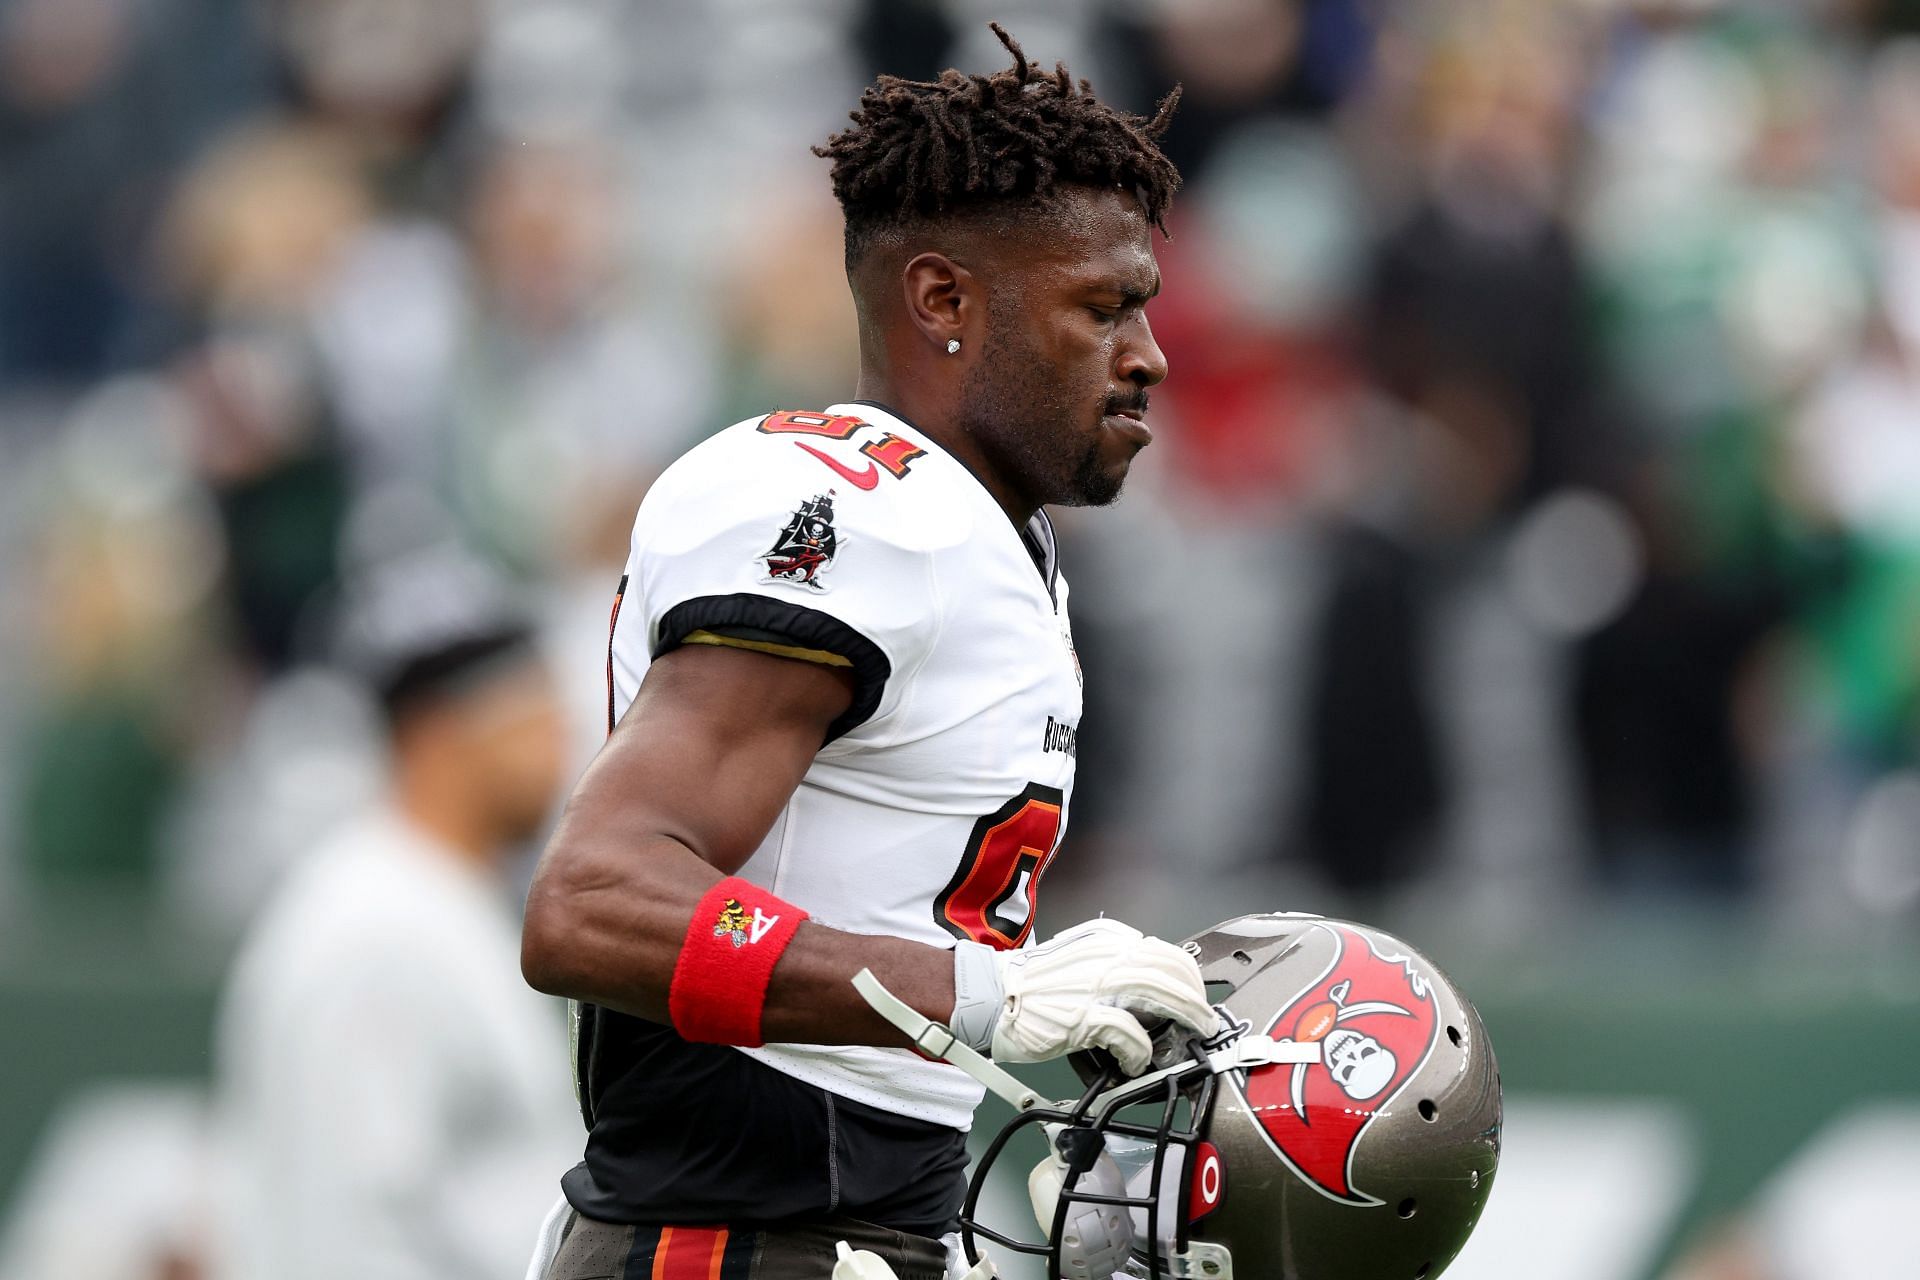 Antonio Brown famously stormed off the field during the Tampa Bay Buccaneers clash versus New York Jets